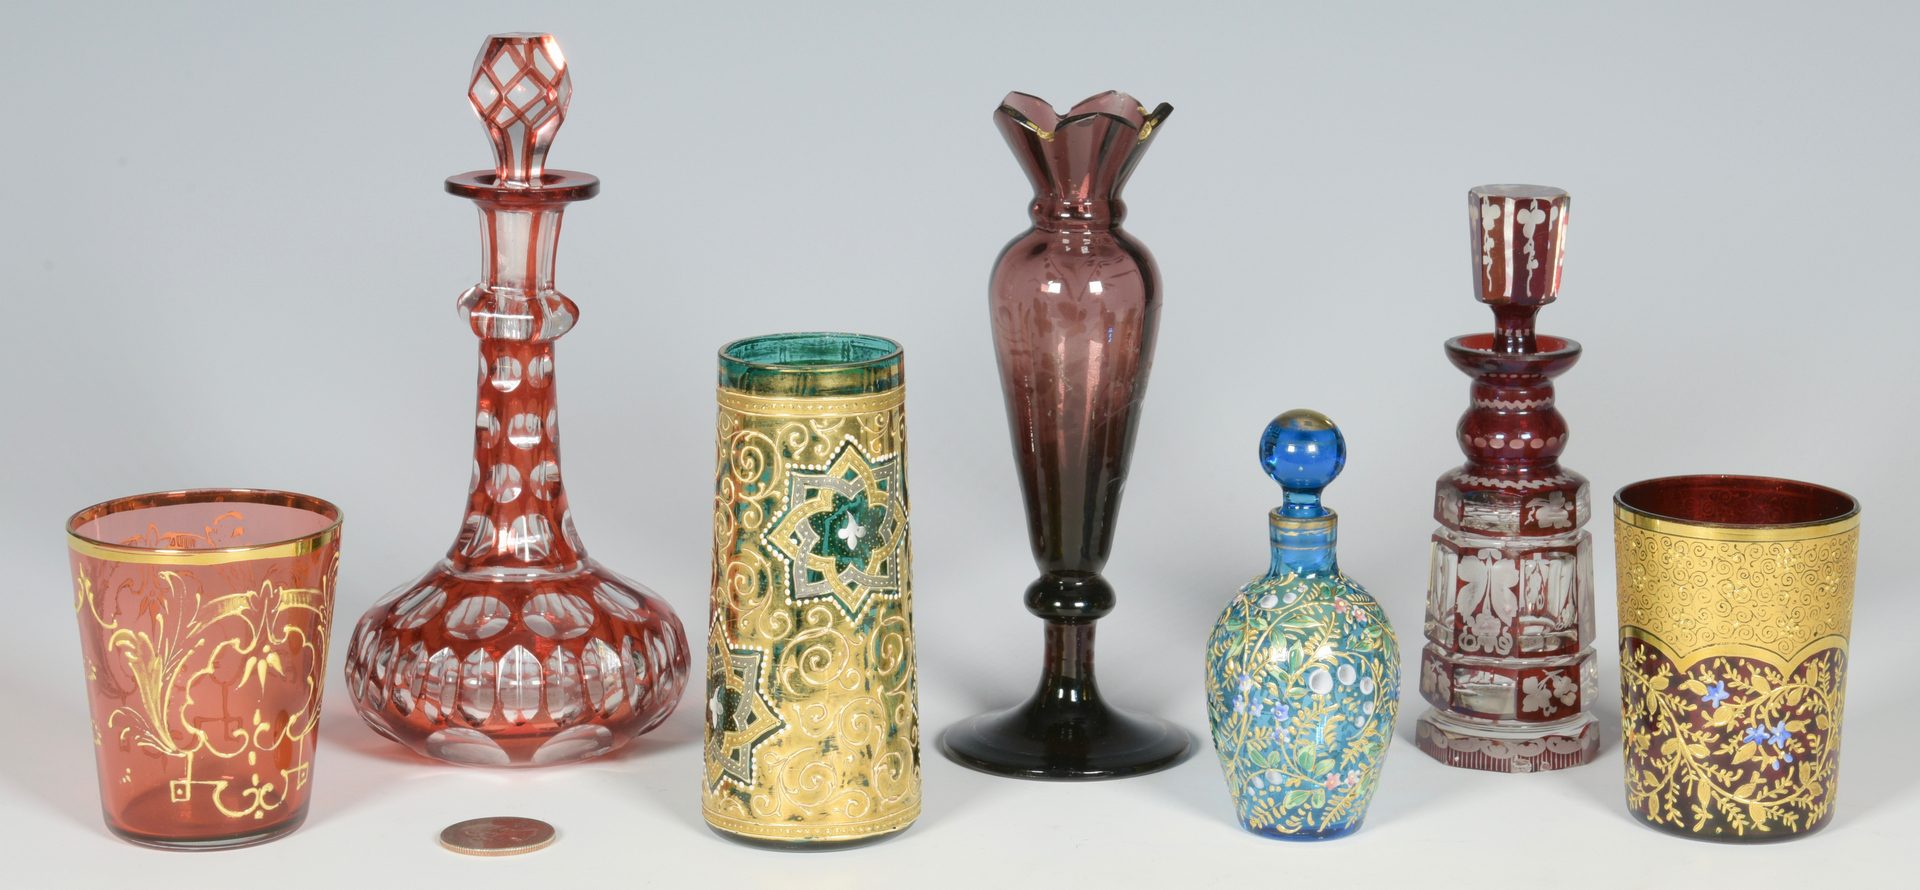 Lot 685: 7 Colored Glass Perfume Bottles and Cups